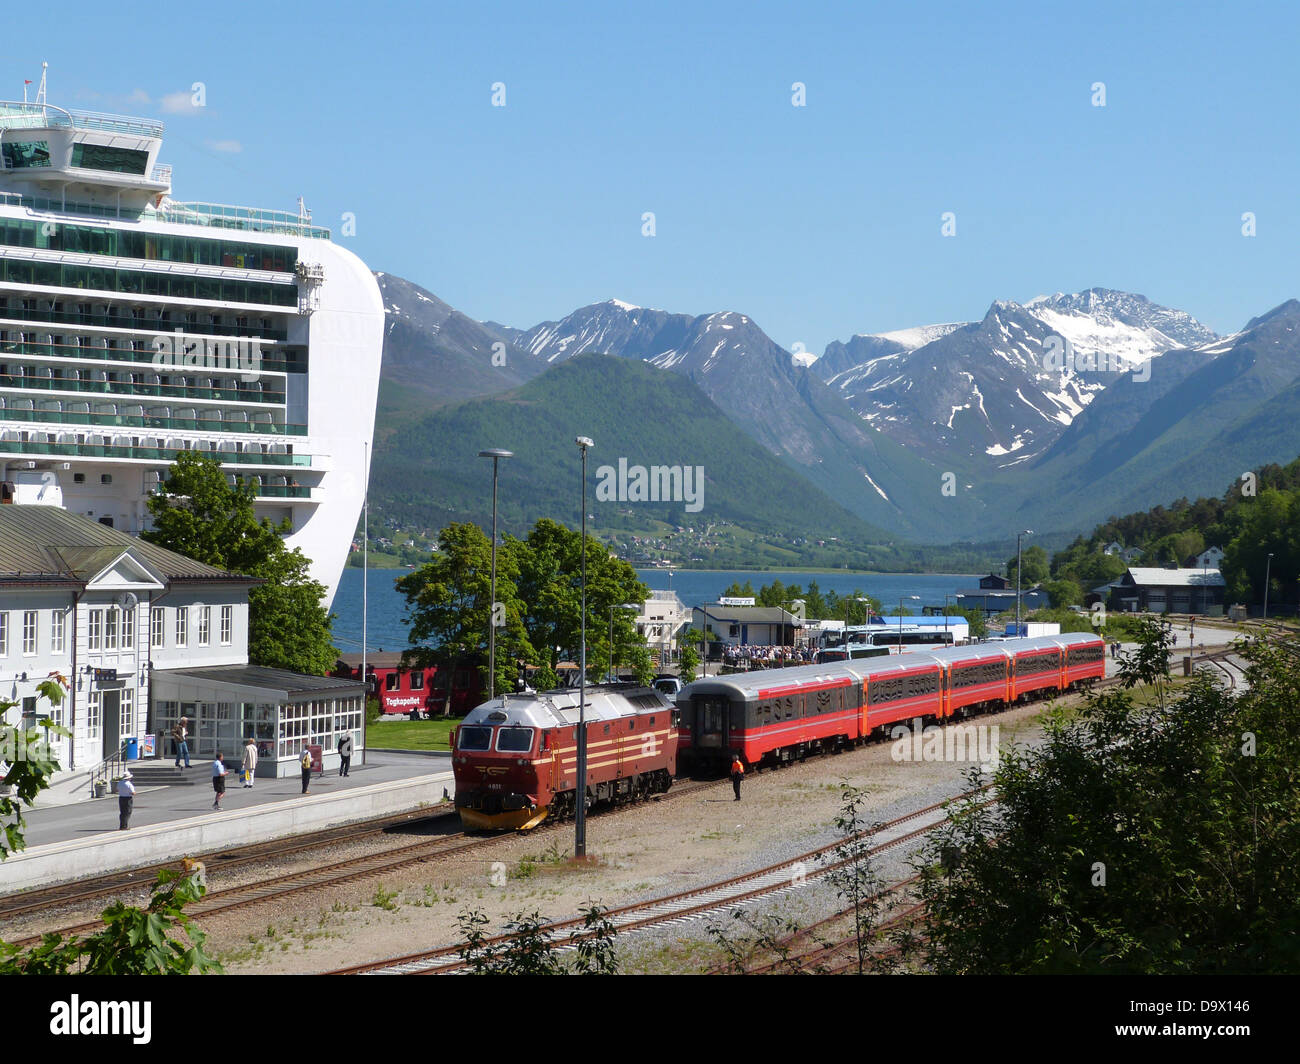 The P&O cruise ship Ventura at Berth in Andalsnes, Norwegian Fjords. Rauma railway train in the station. Stock Photo